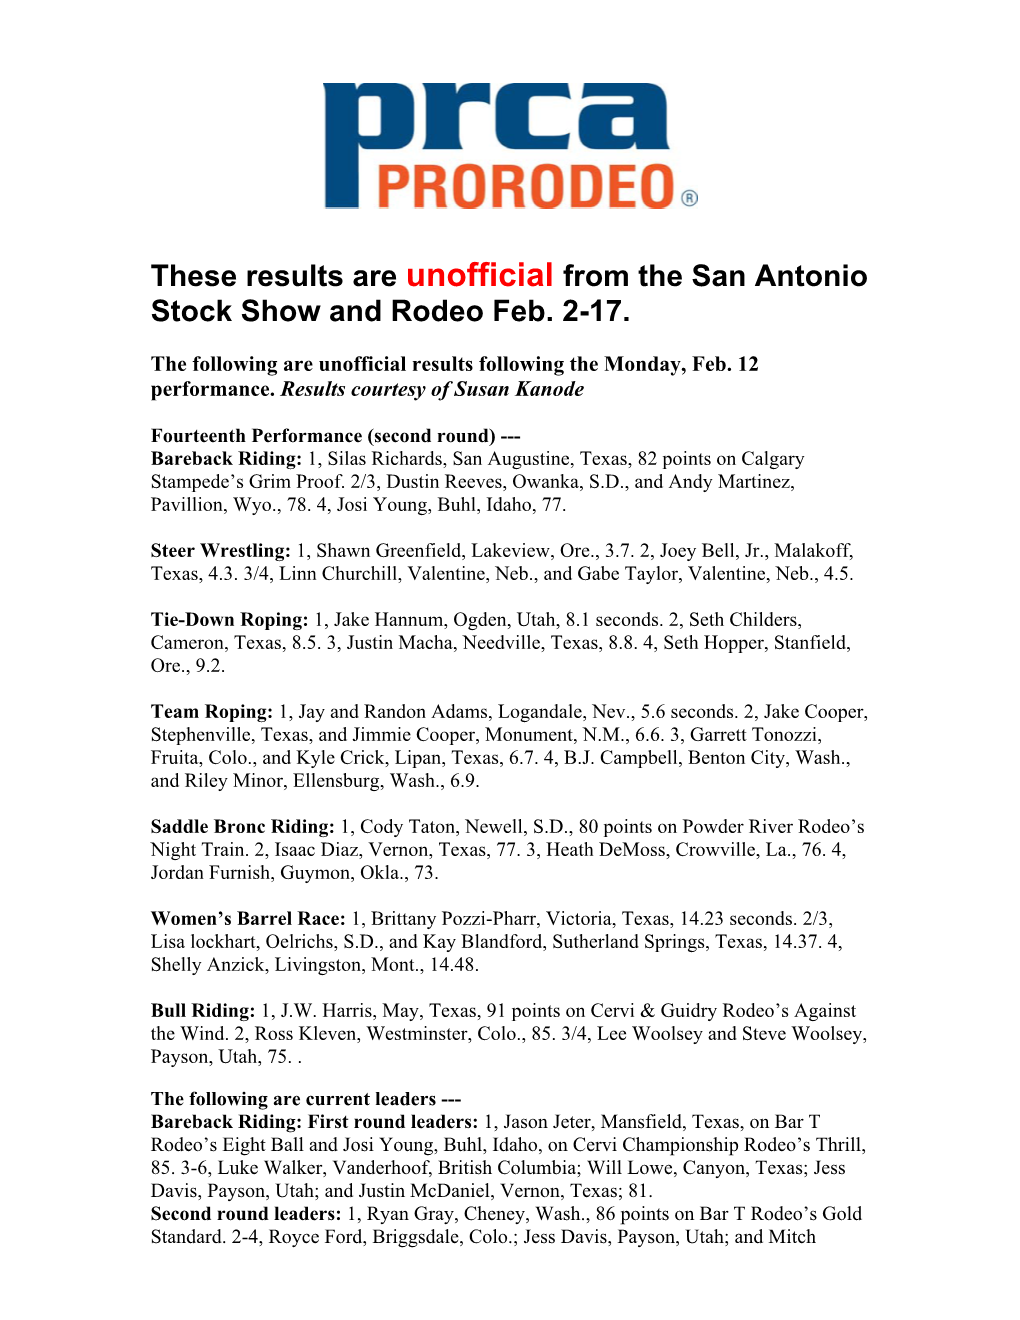 These Results Are Unofficial from the San Antonio Stock Show and Rodeo Feb